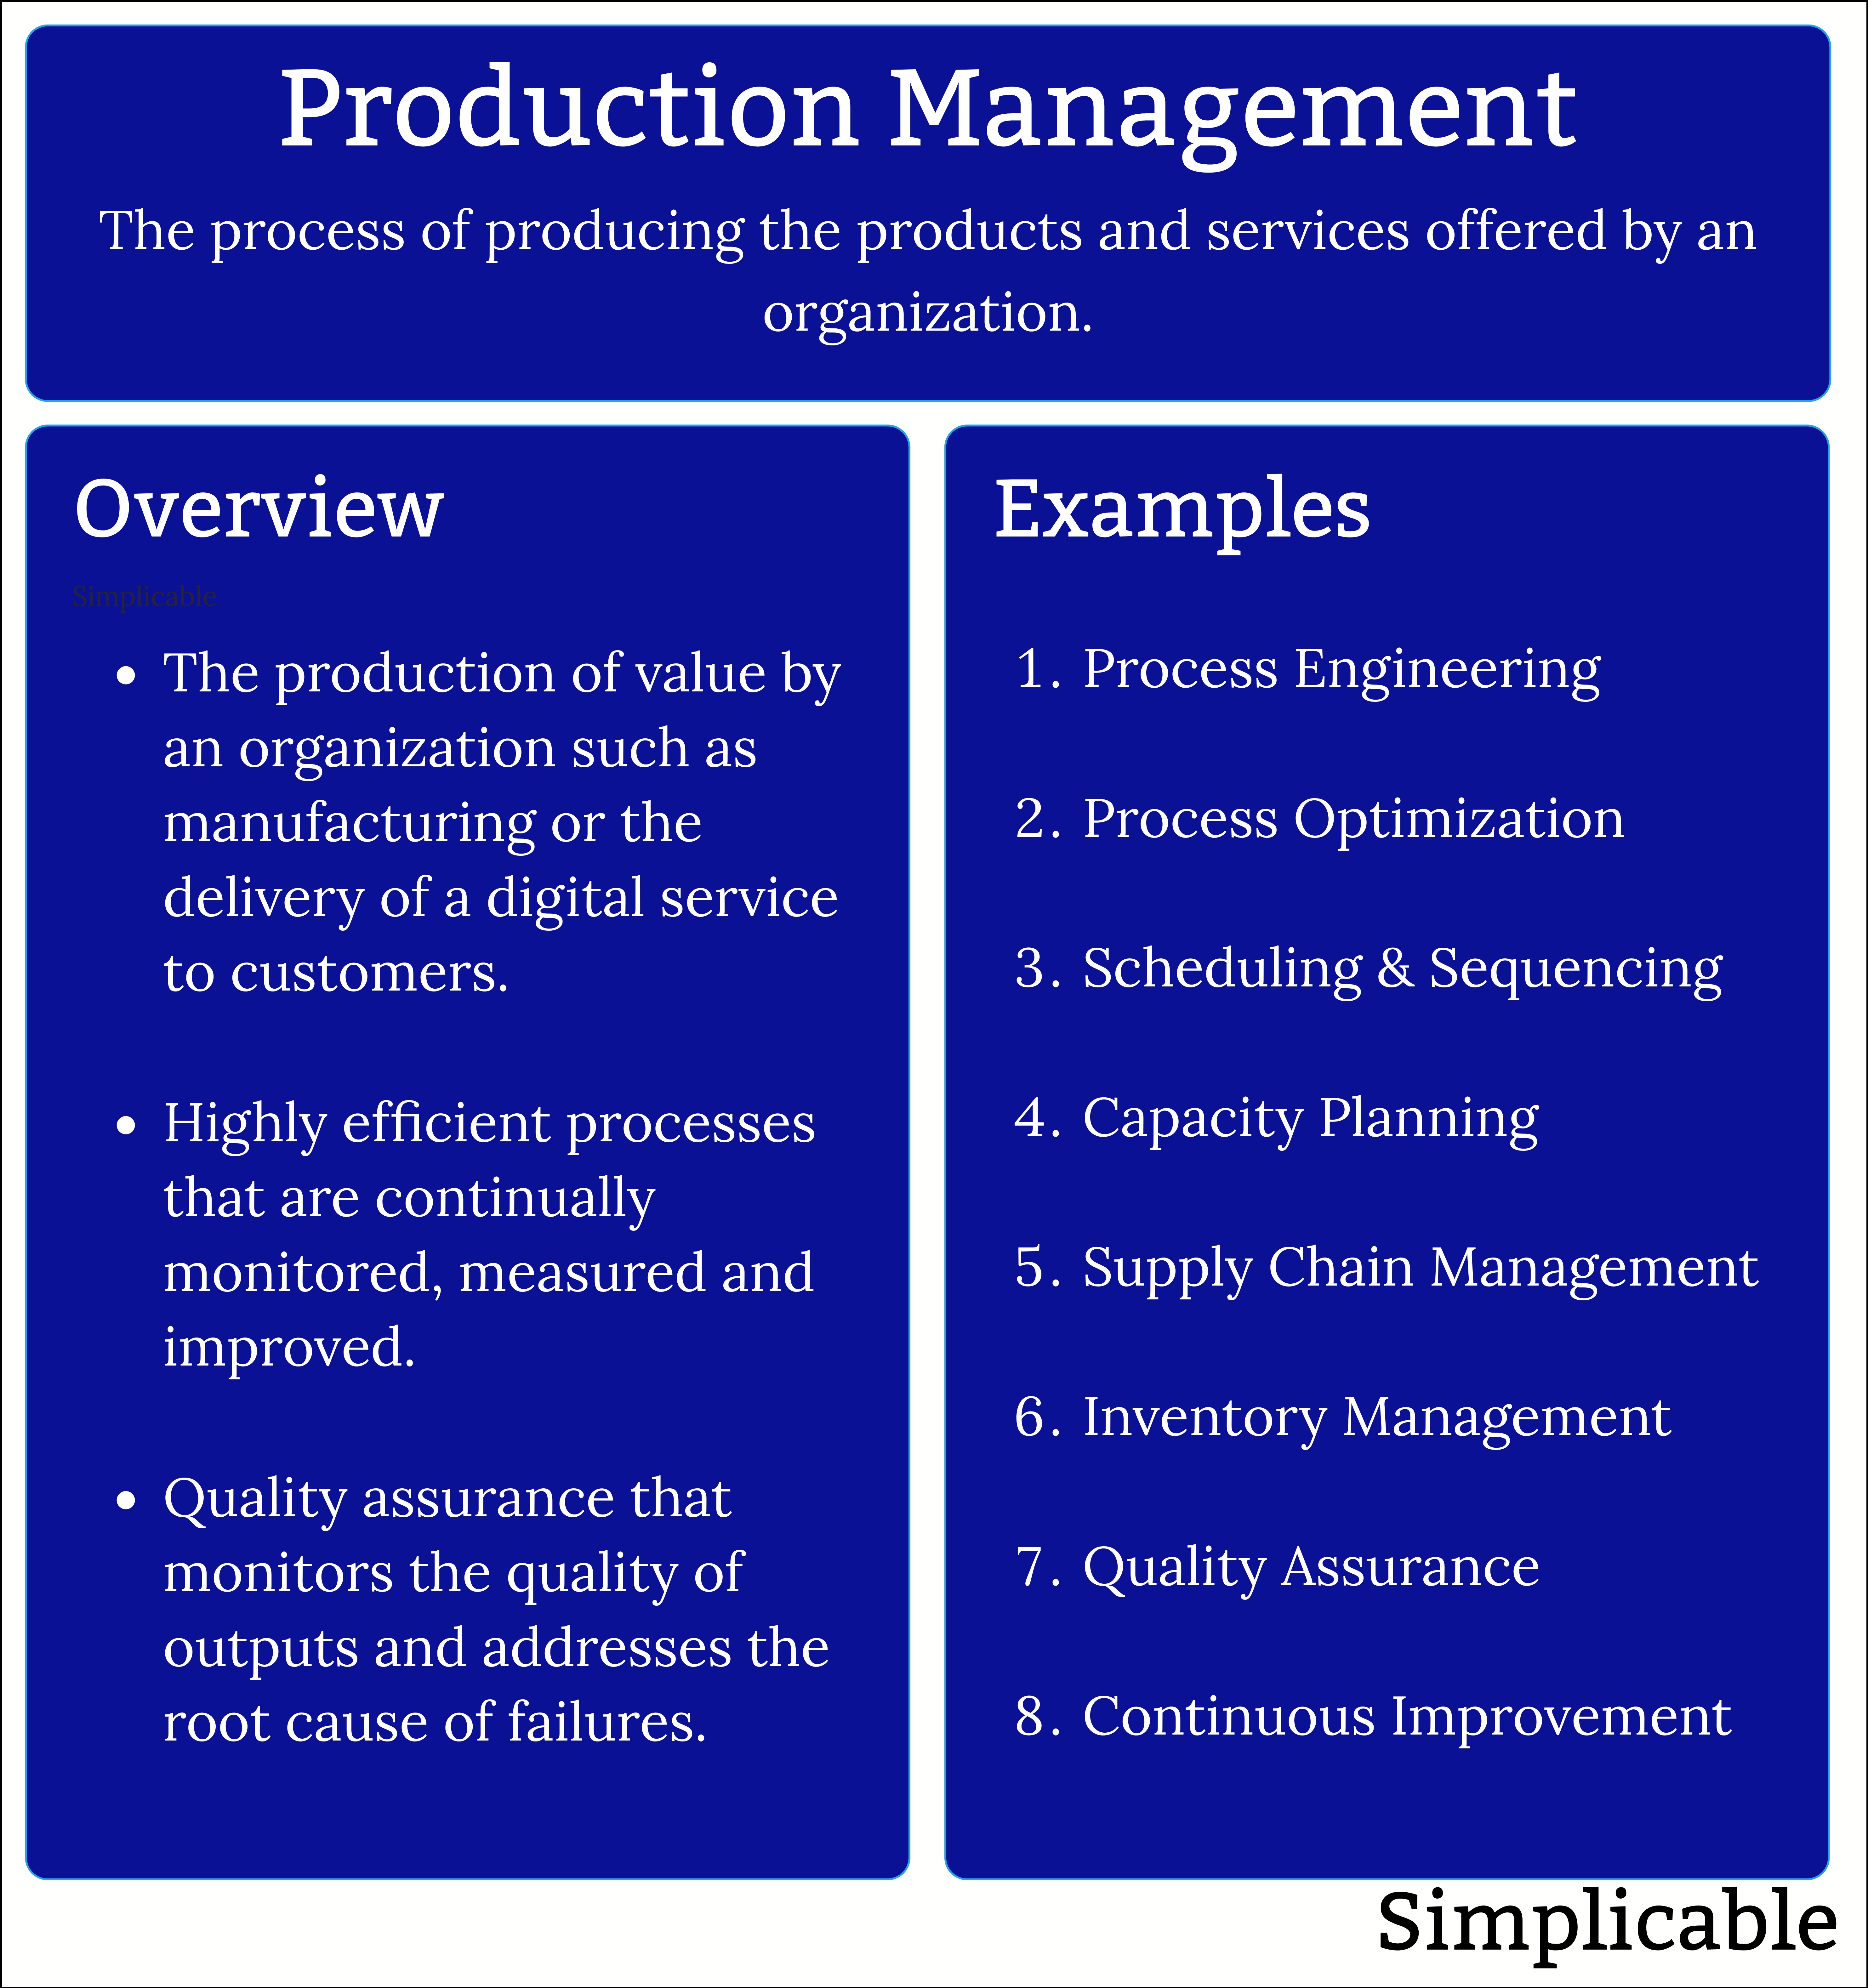 production management summary and examples